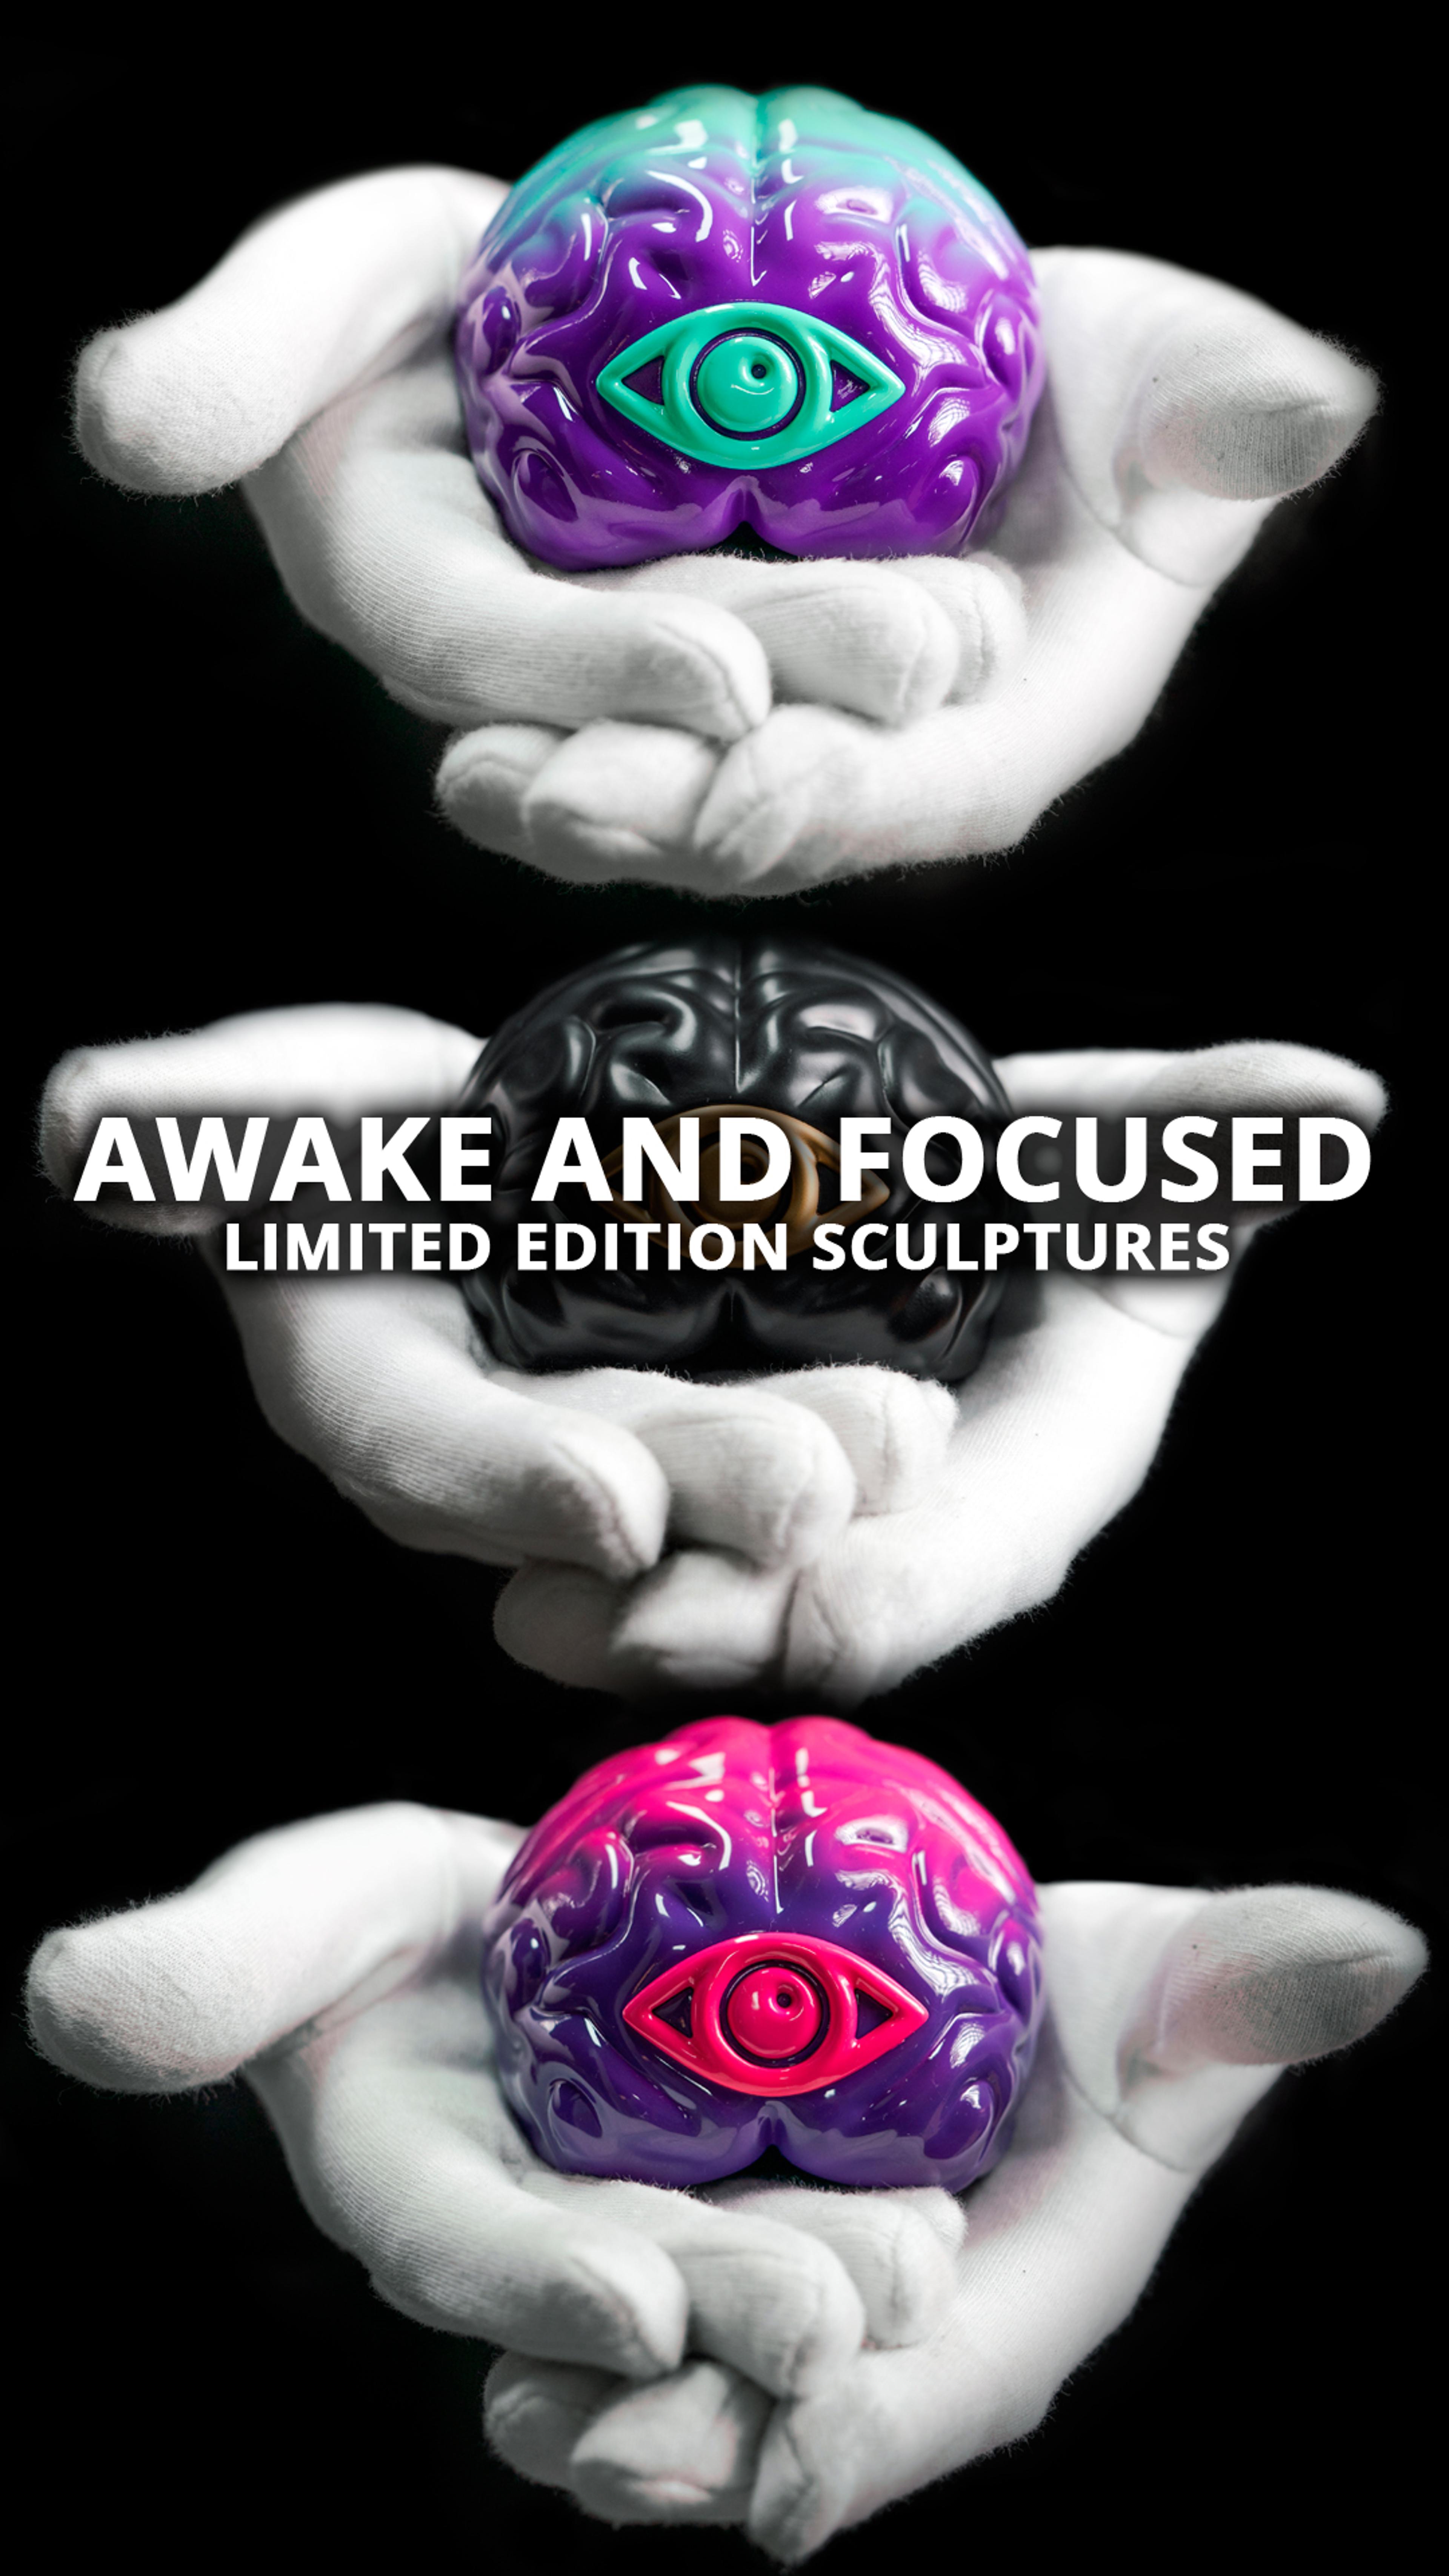 Preview image for the show titled "AWAKE AND FOCUSED SCULPTURE RELEASE" at Today @ 8:00 PM